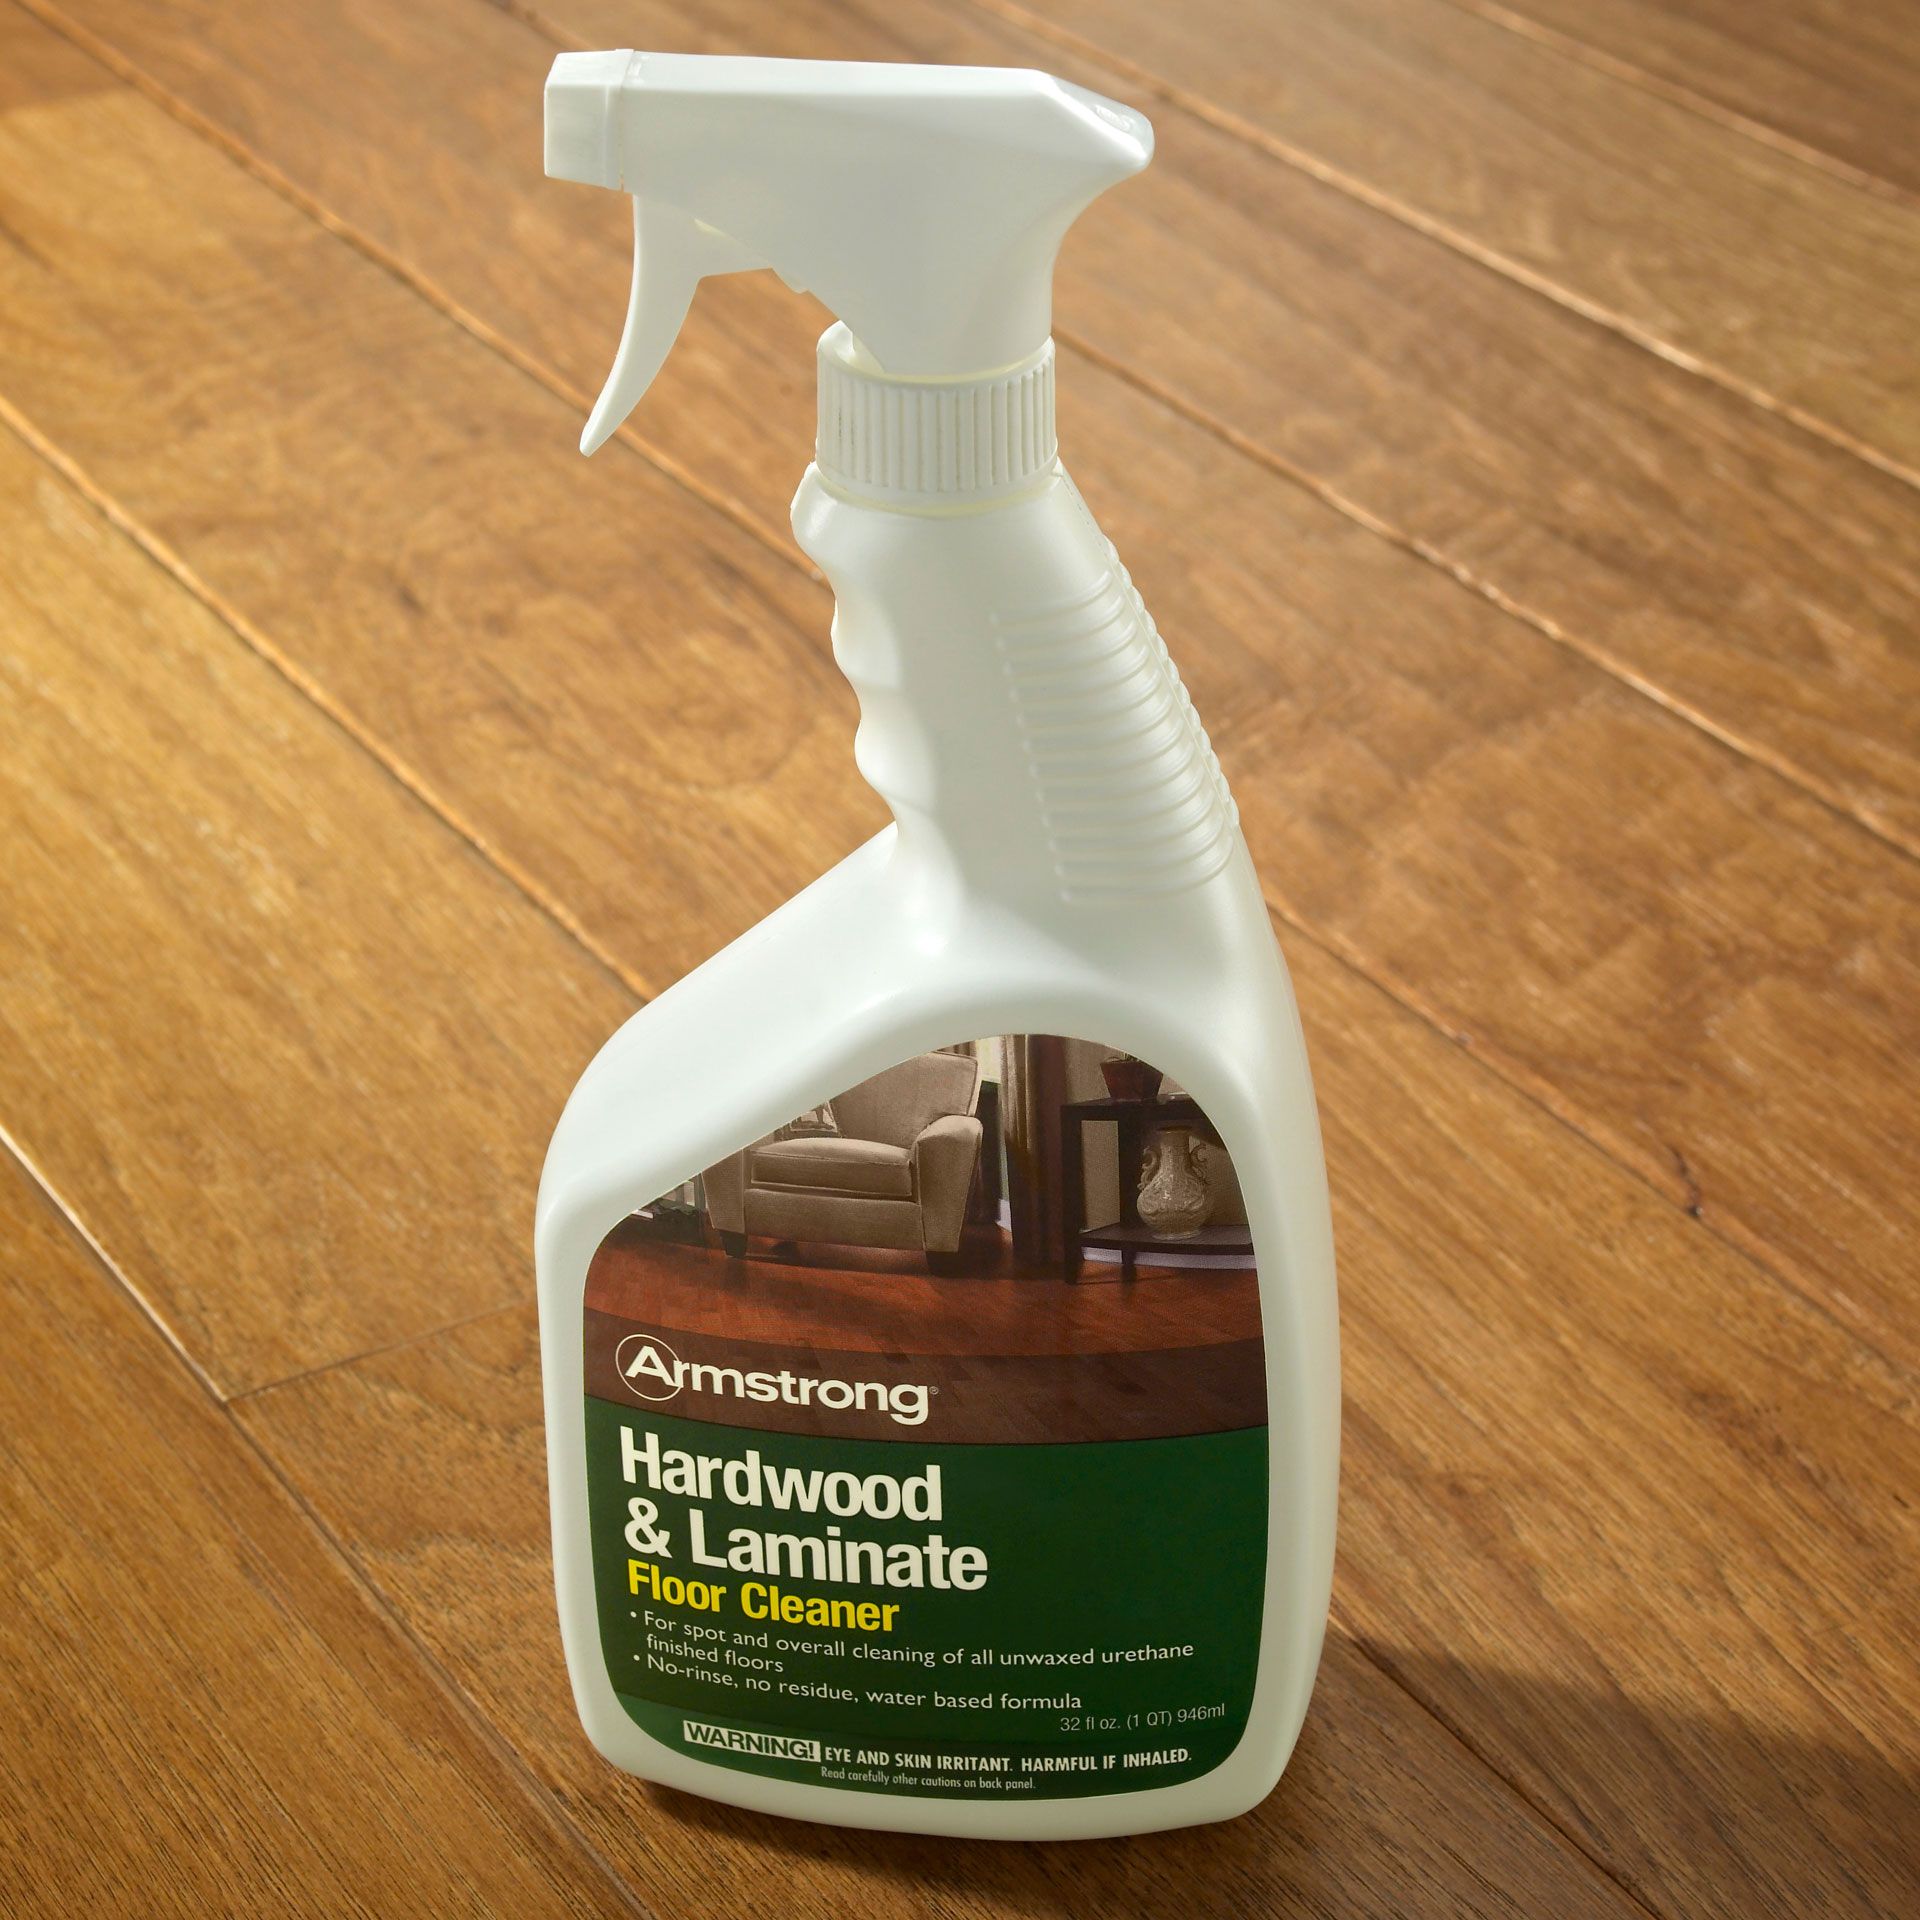 Armstrong Hardwood Floor Cleaner Review, How To Clean Armstrong Flooring Laminate